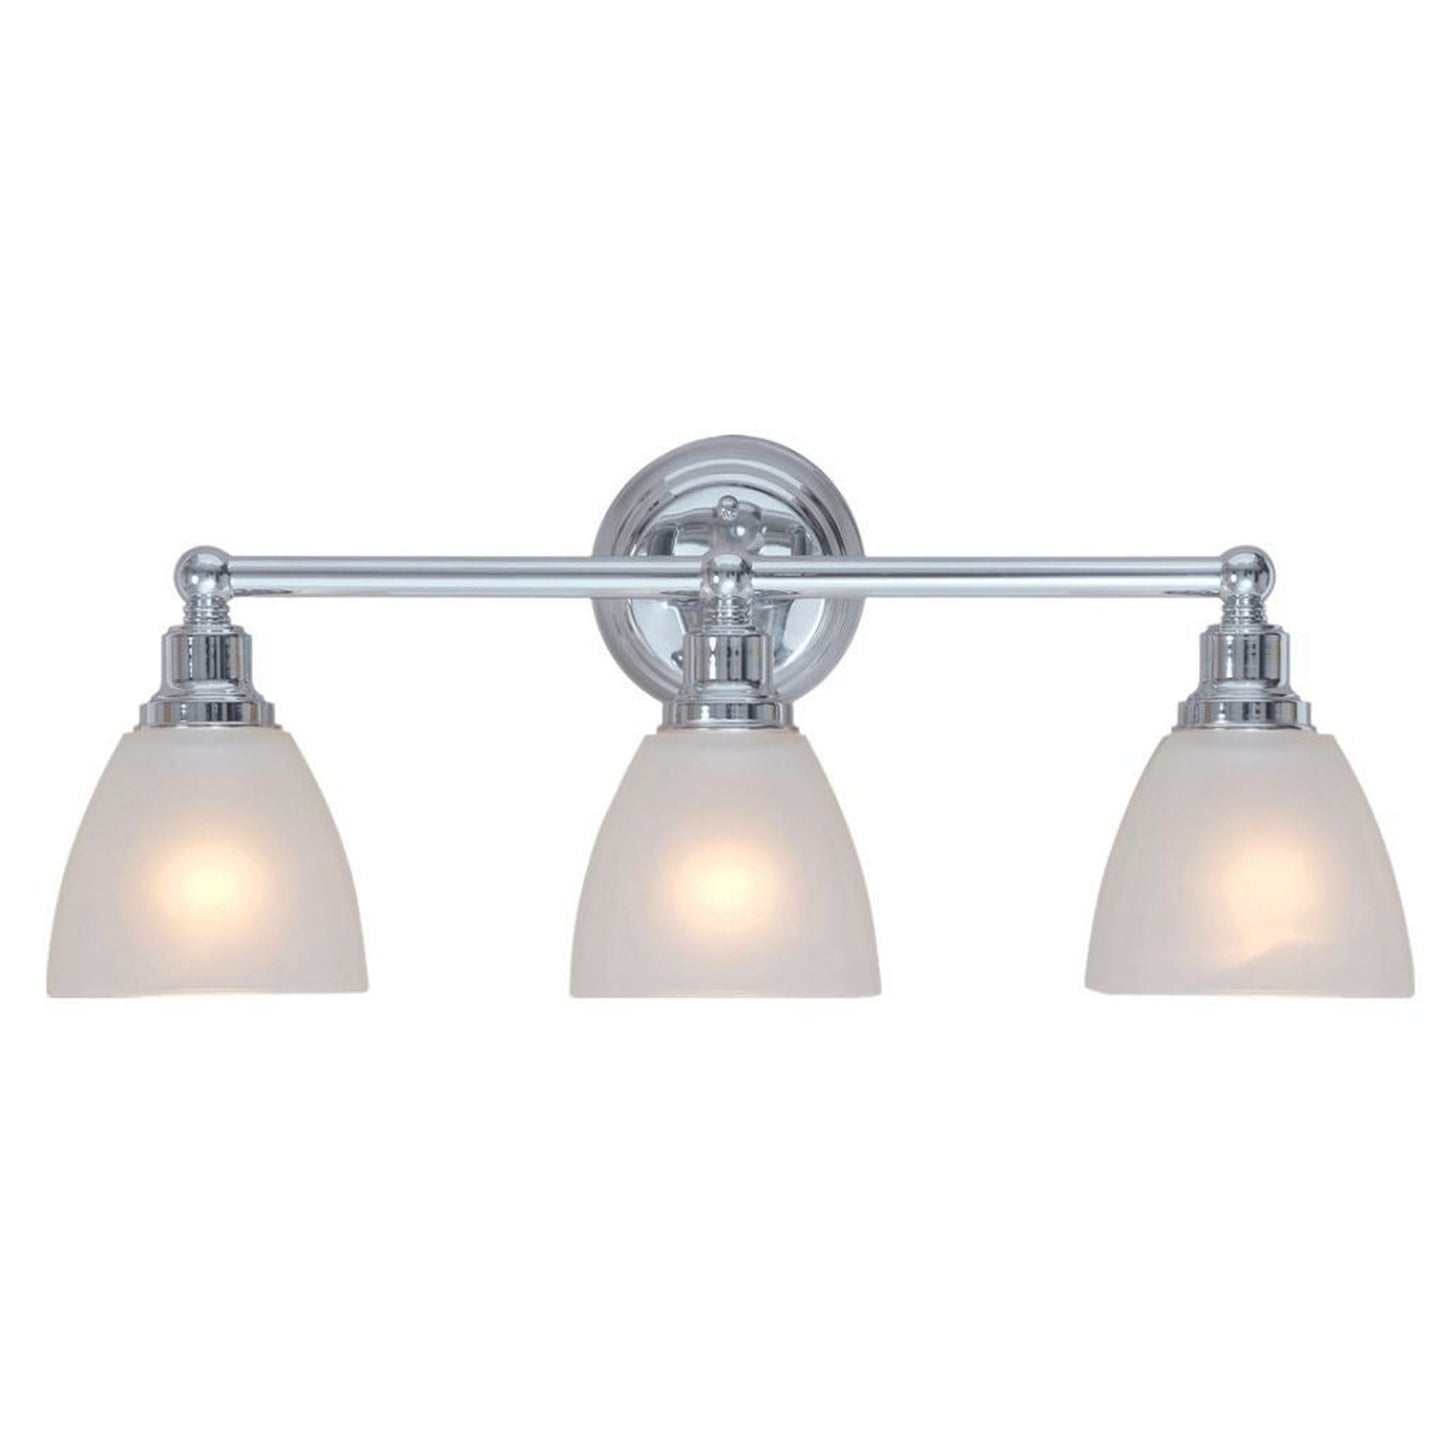 Craftmade Bradley 24" 3-Light Chrome Vanity Light With White Frosted Glass Shades